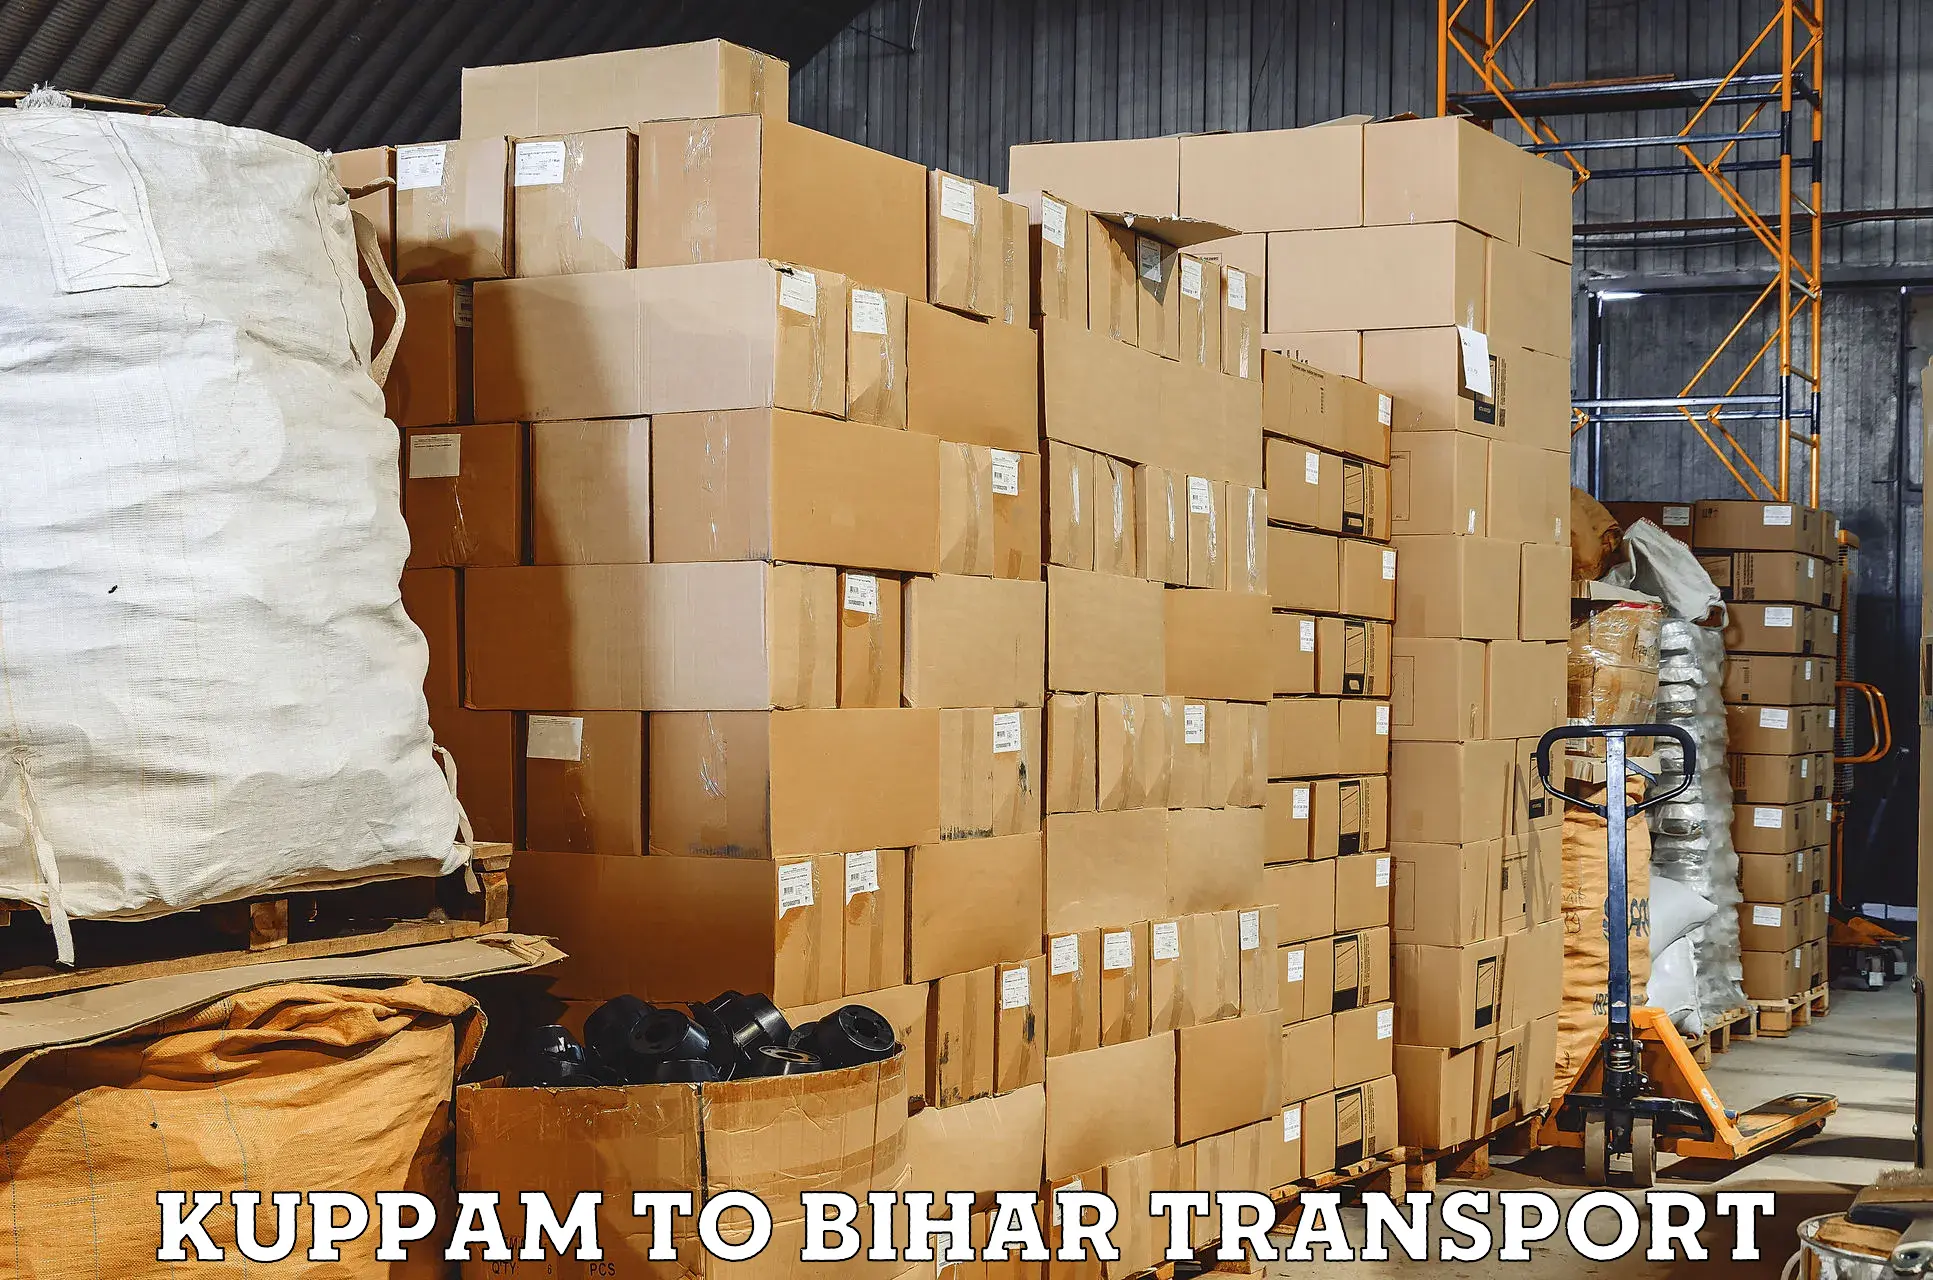 Express transport services Kuppam to Bhorey